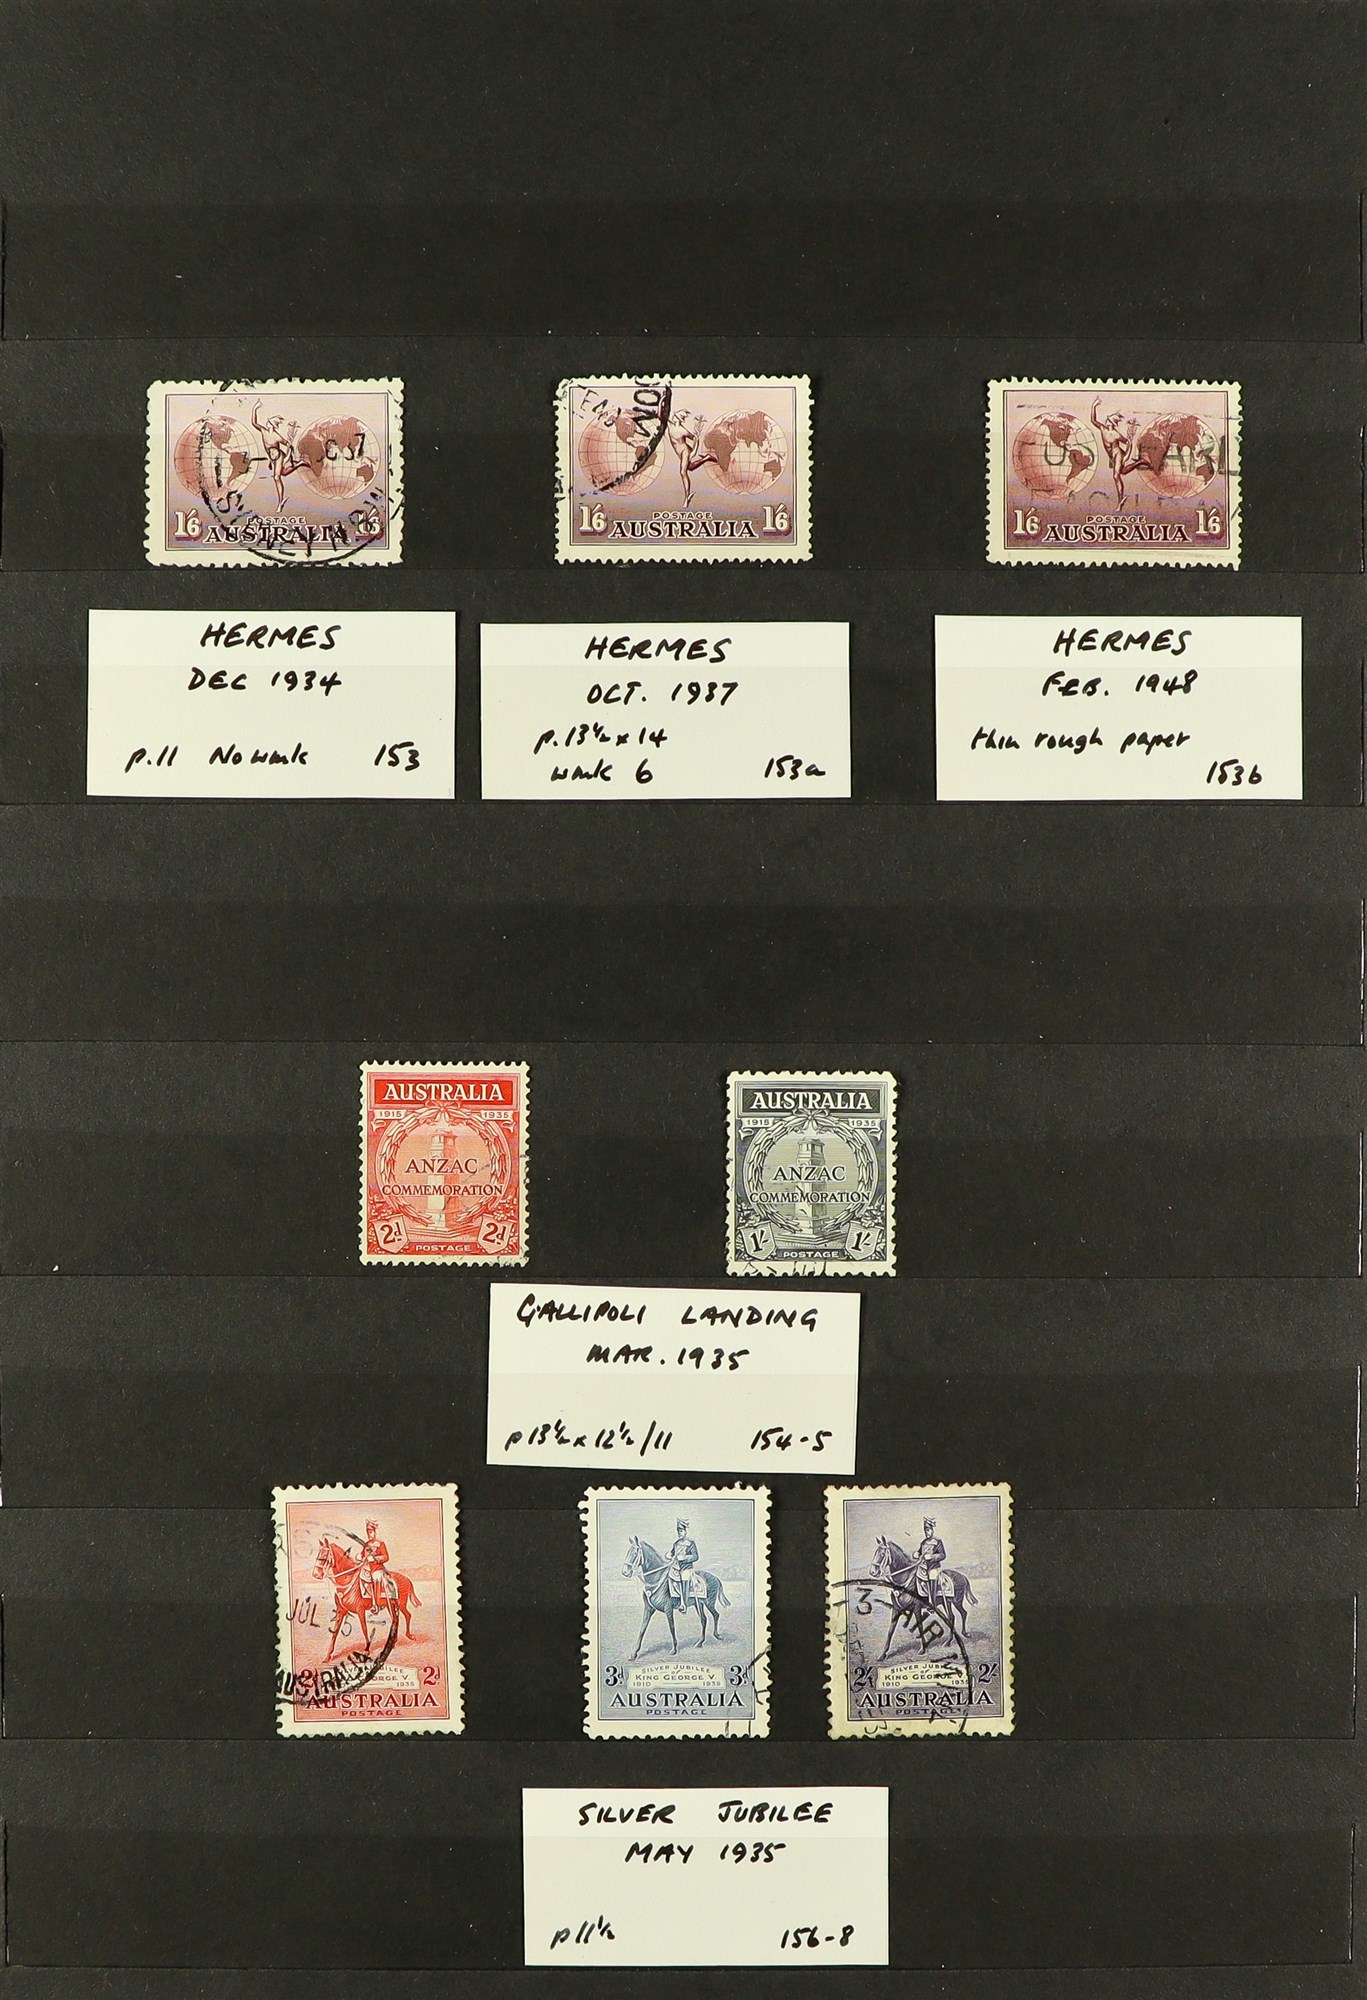 AUSTRALIA 1914 -1936 COLLECTION of 42 used stamps, a complete run of commemorative sets to 1936, - Image 3 of 6